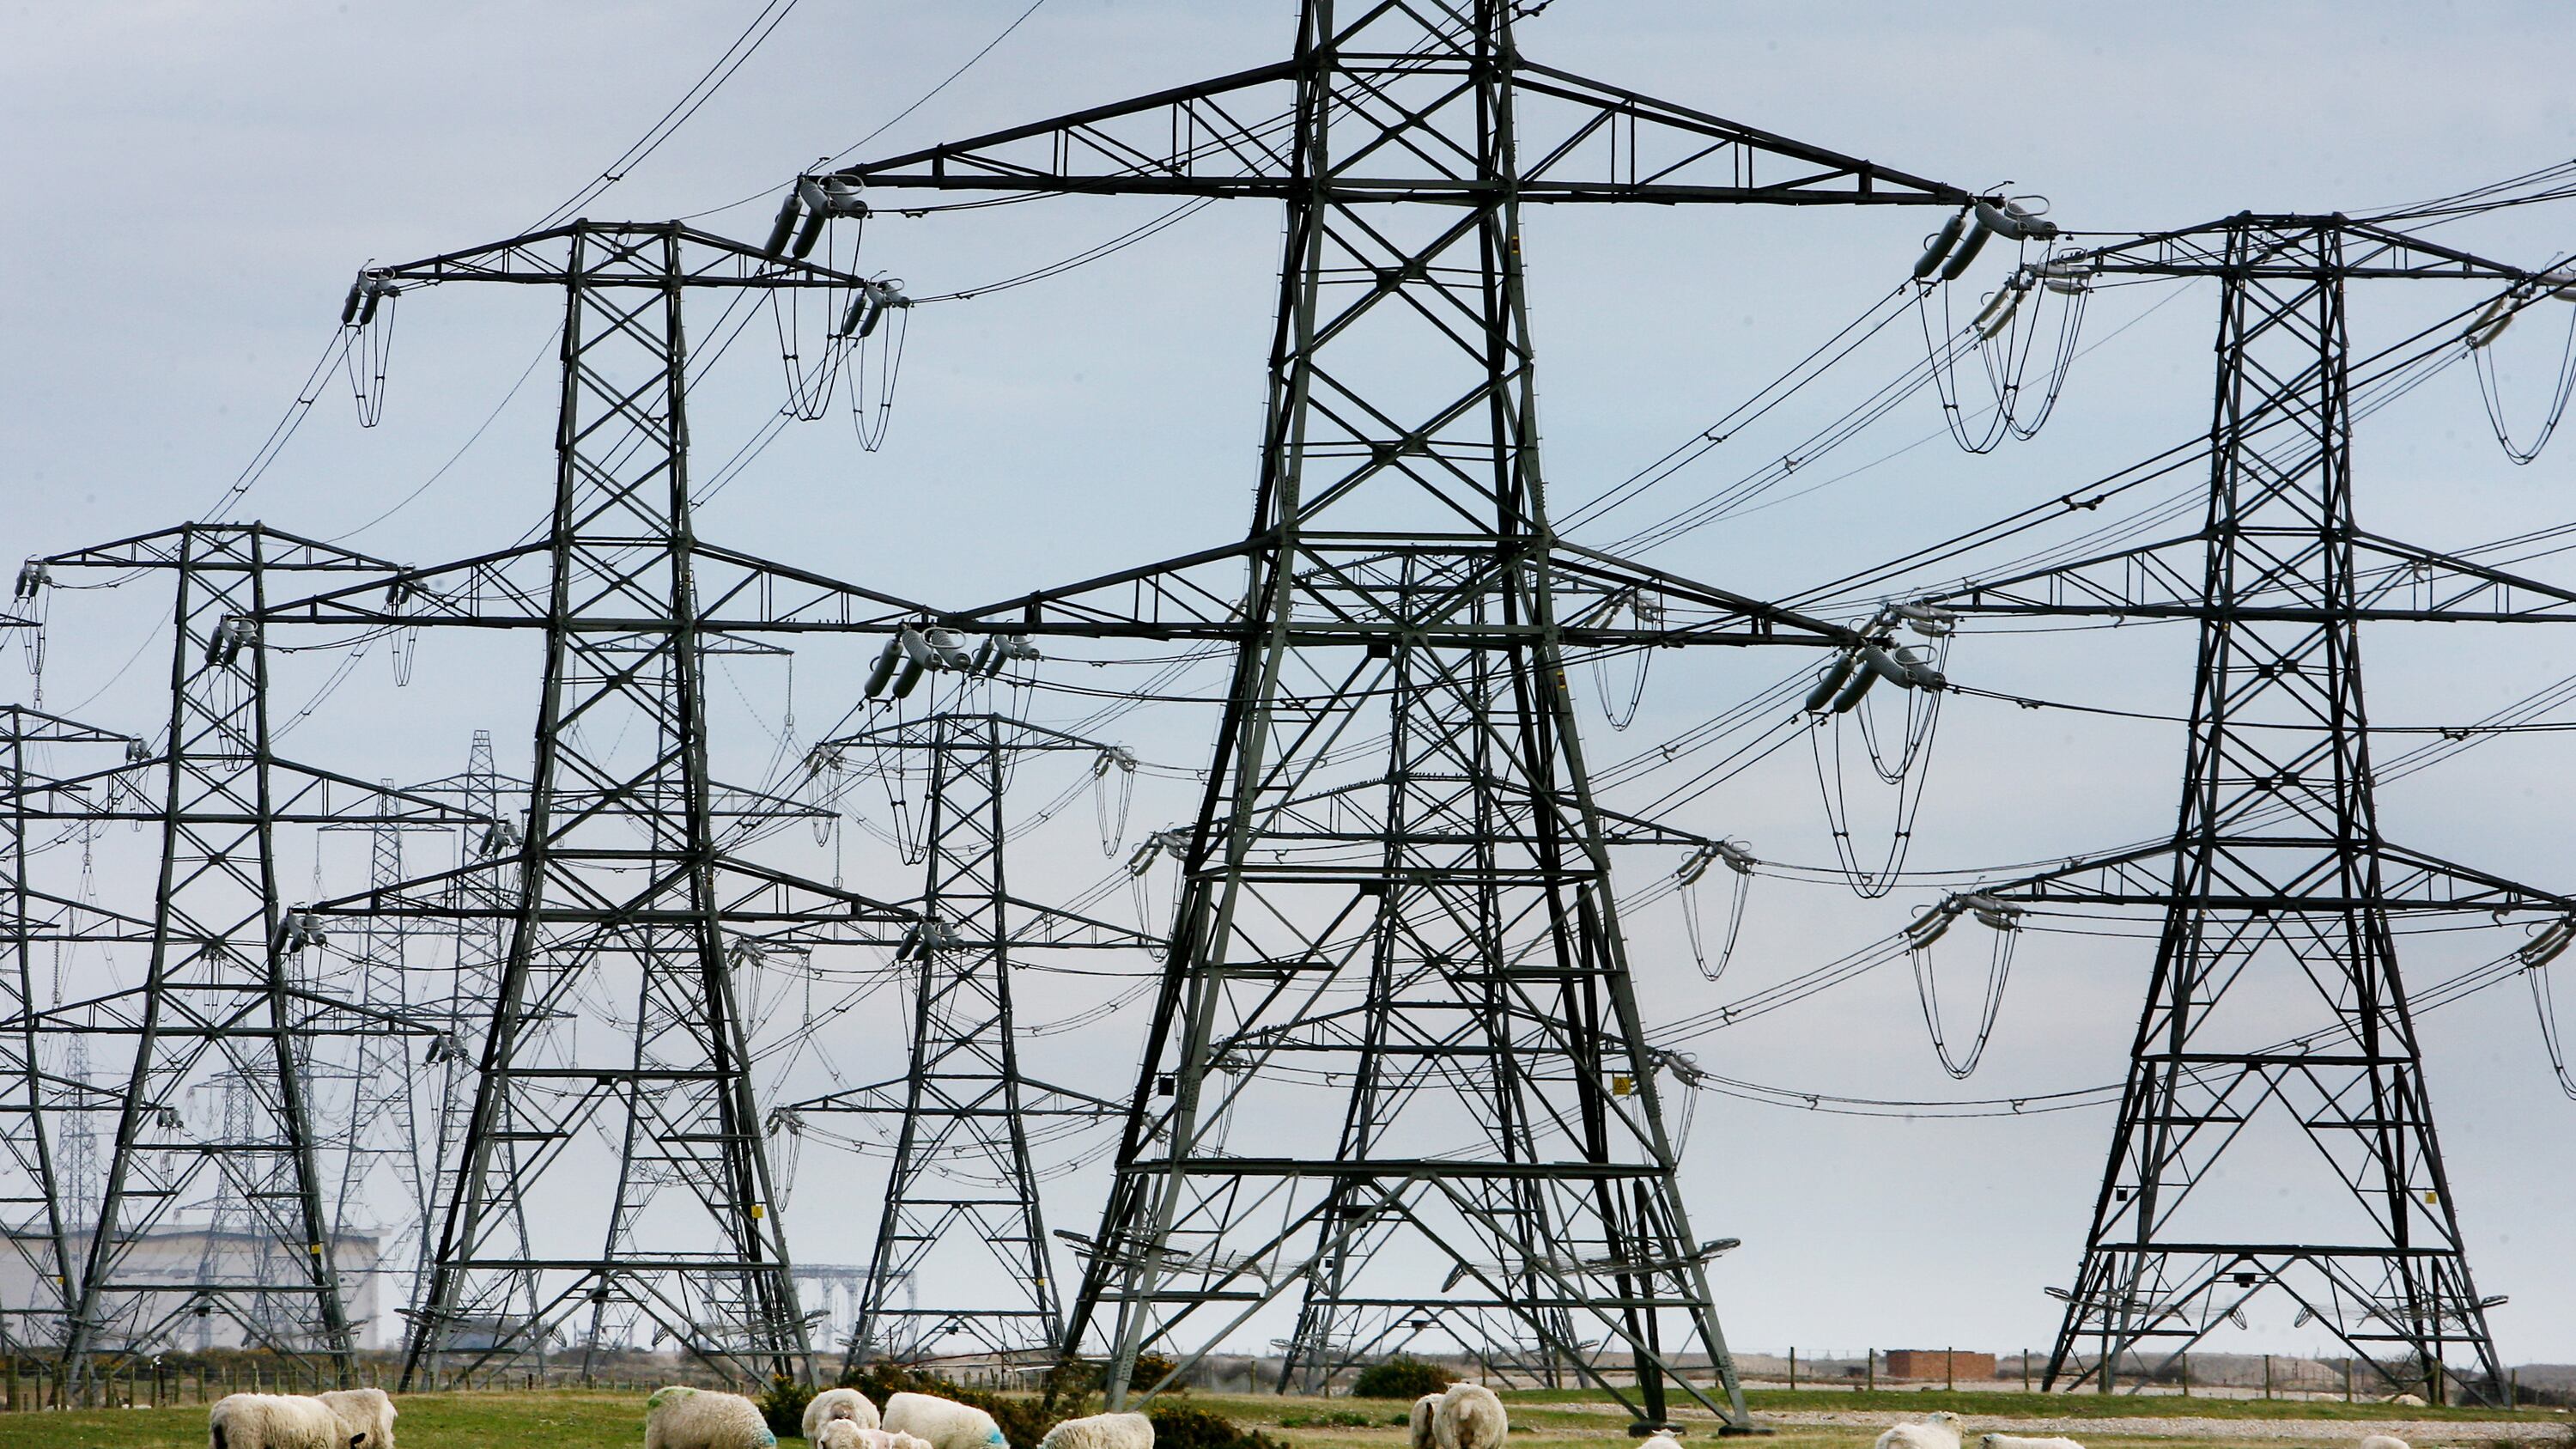 National Grid runs much of Britain’s electricity infrastructure